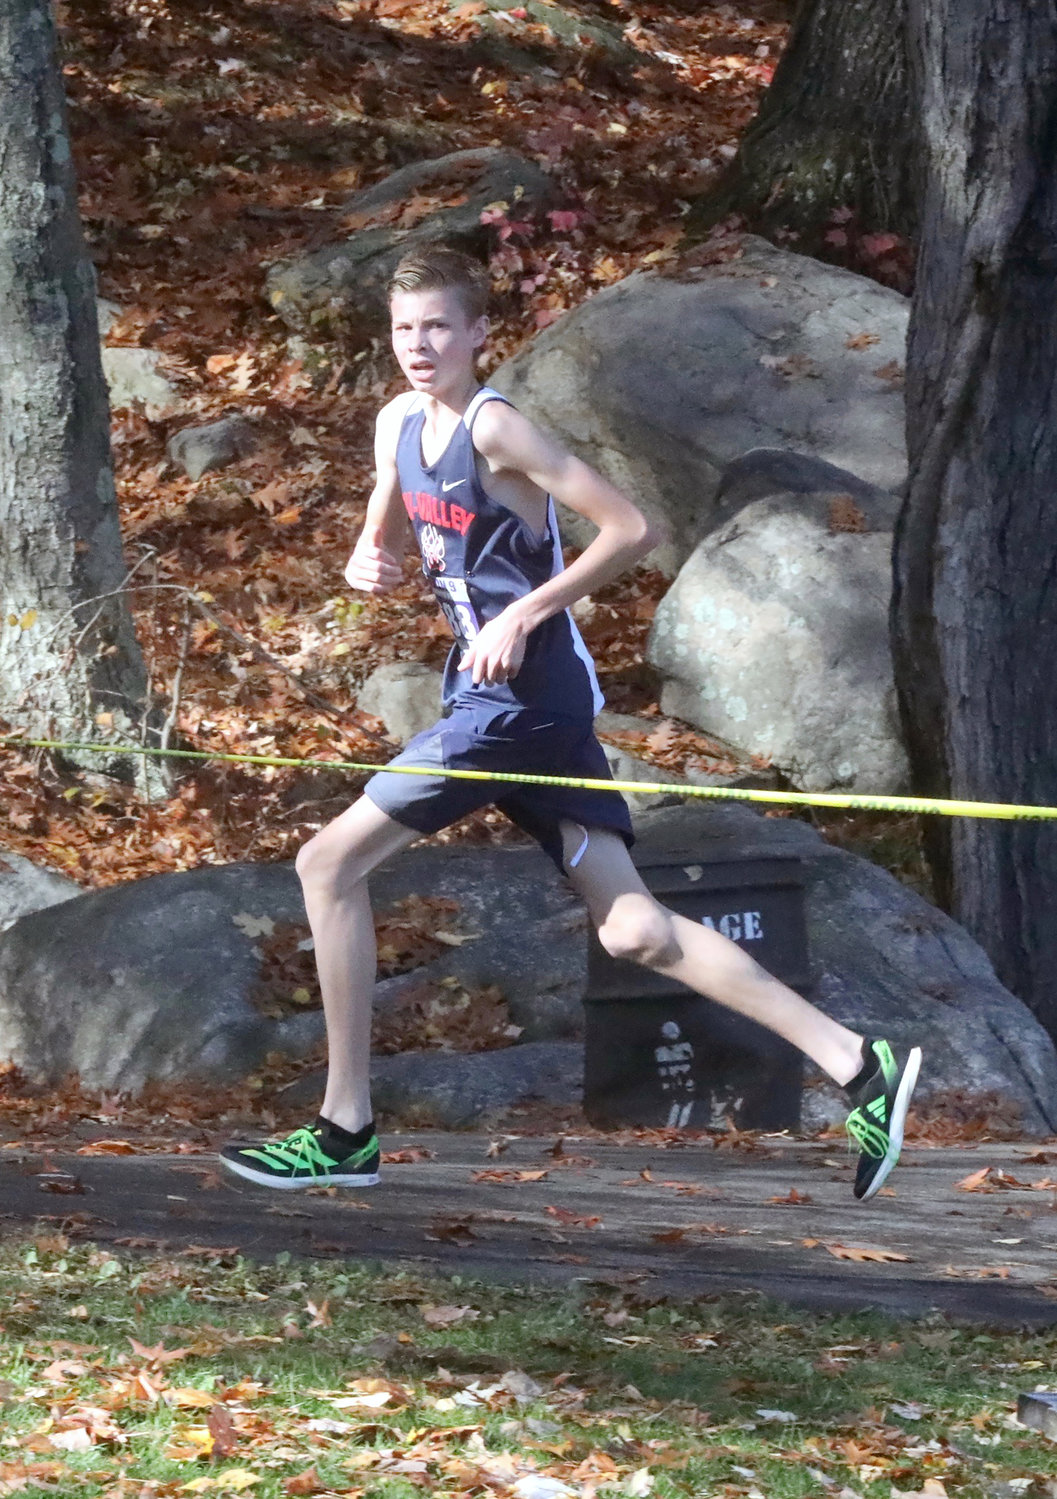 Sophomore Van Furman finished second in the race in 16:44.60, just forty-eight seconds behind his brother Adam.